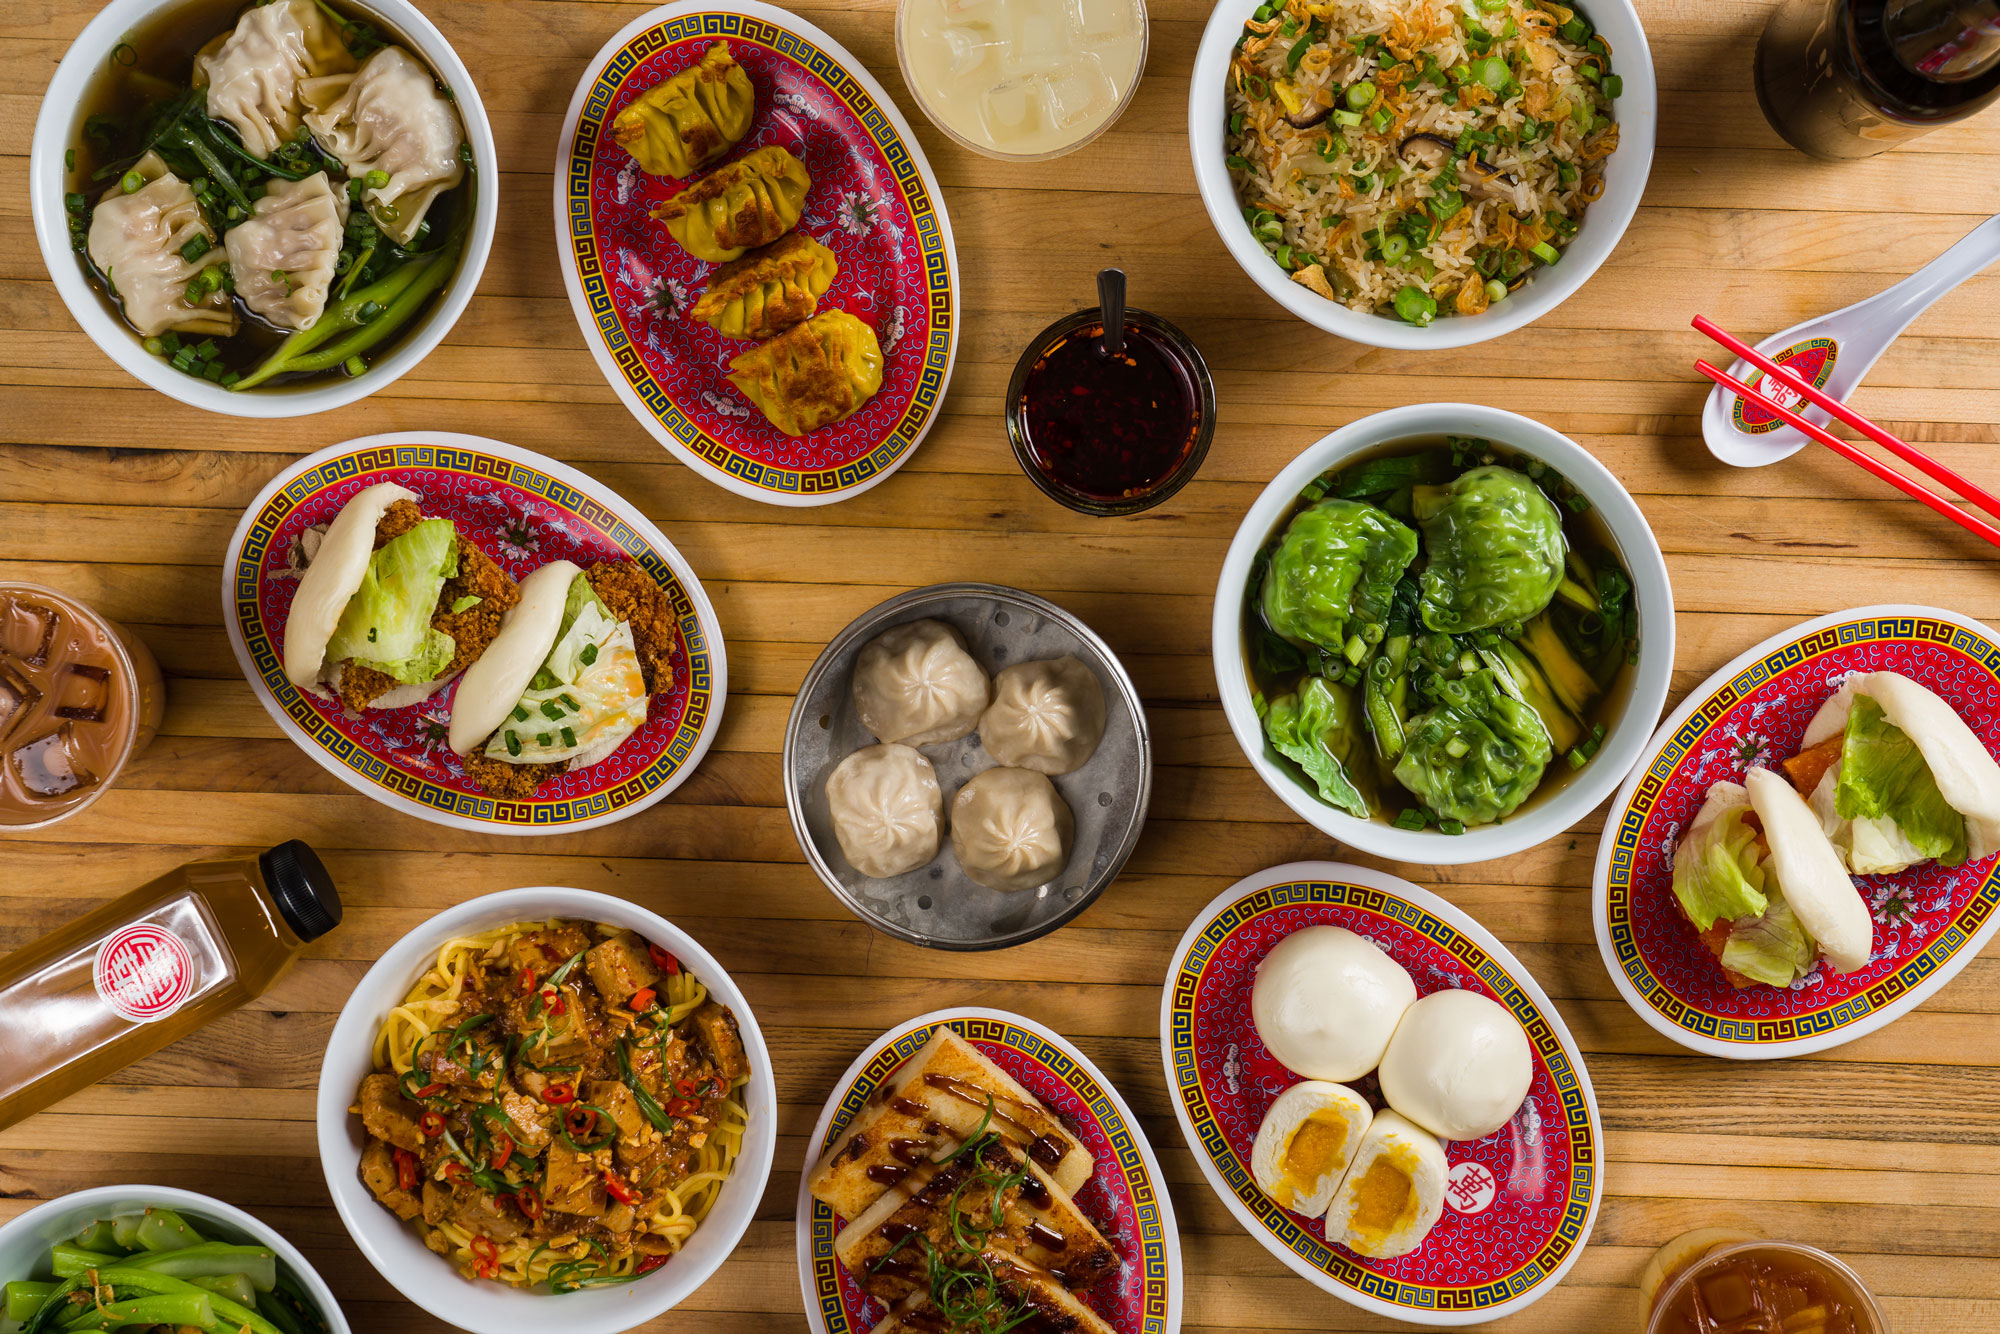 Spread of dishes from Nom Wah Nolita, including buns, dumplings, and noodles